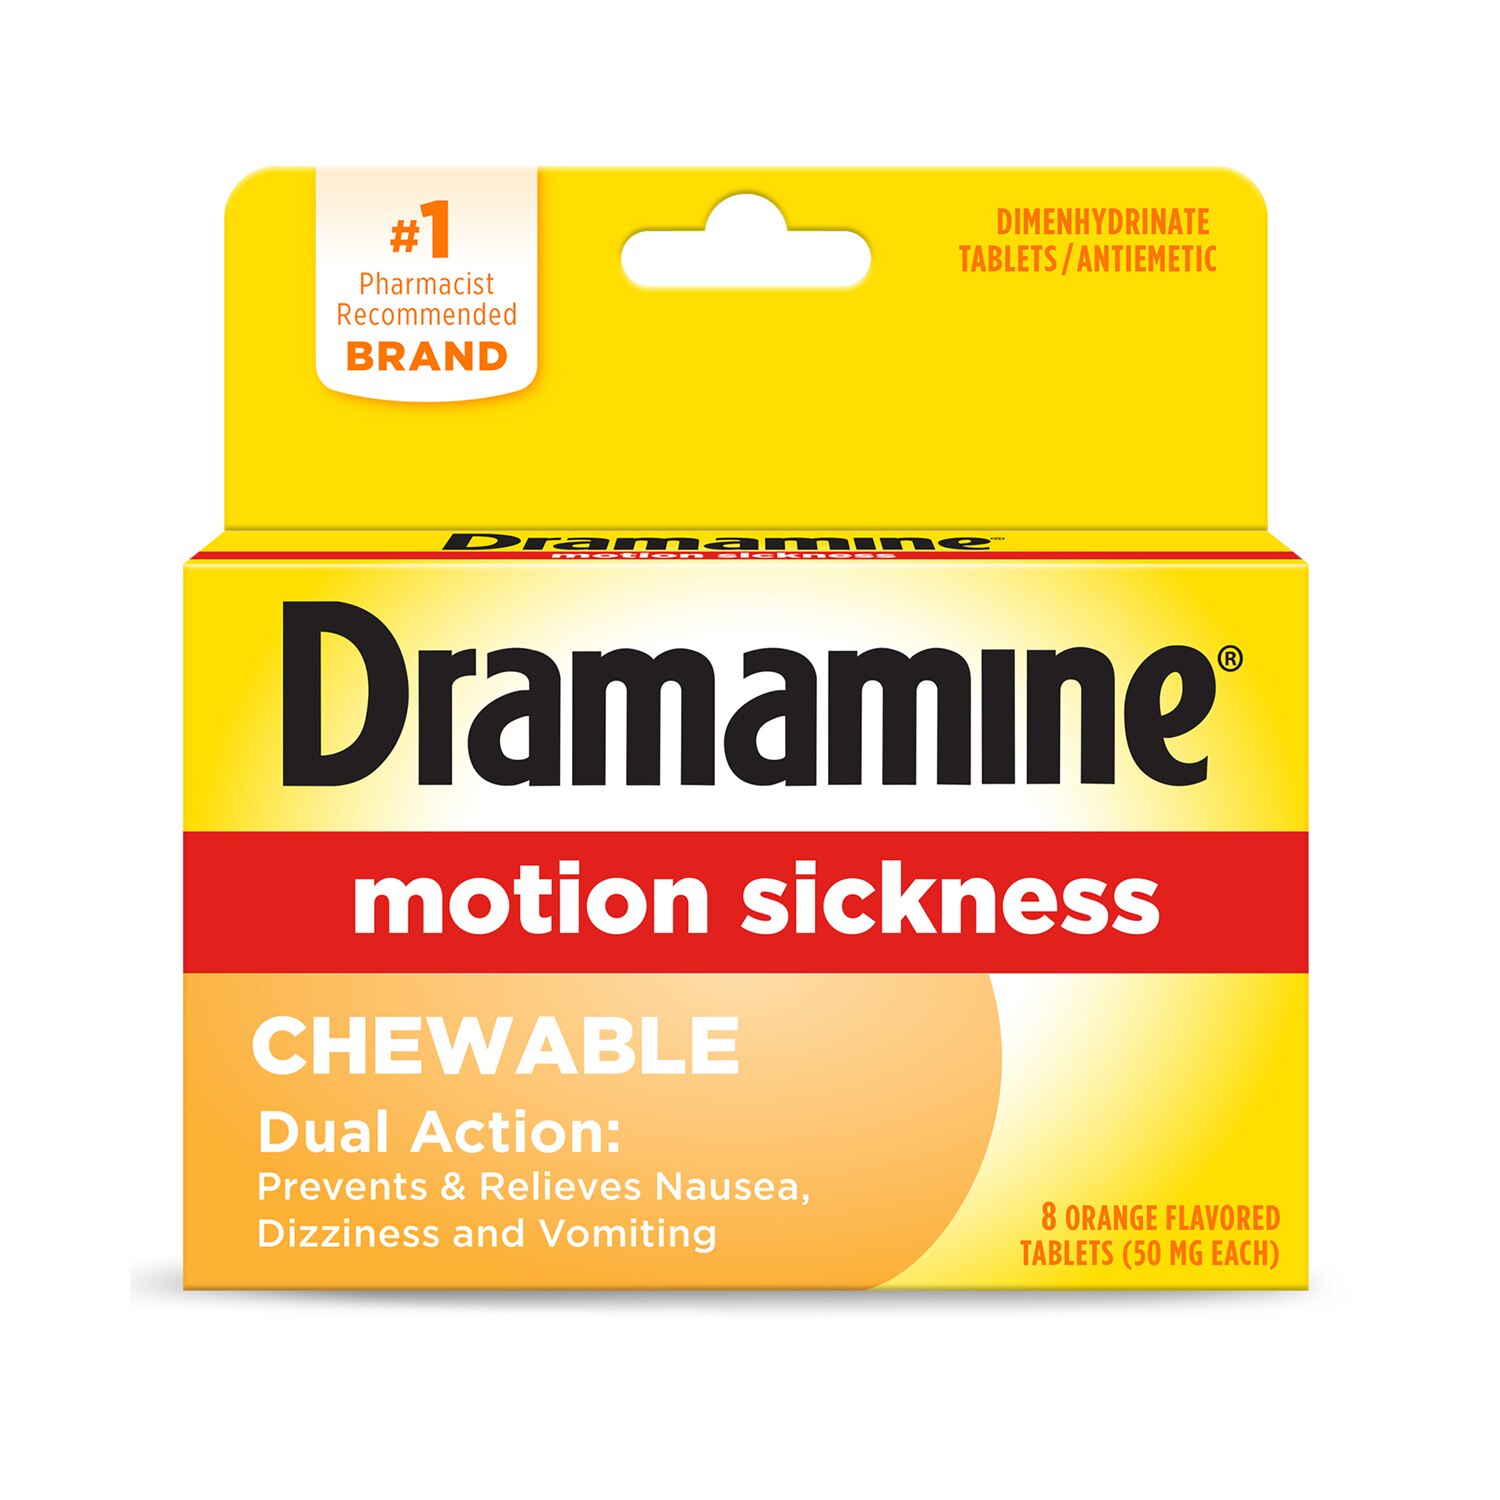 Dramamine Motion Sickness Chewable Tablets, Orange flavored, 8 CT